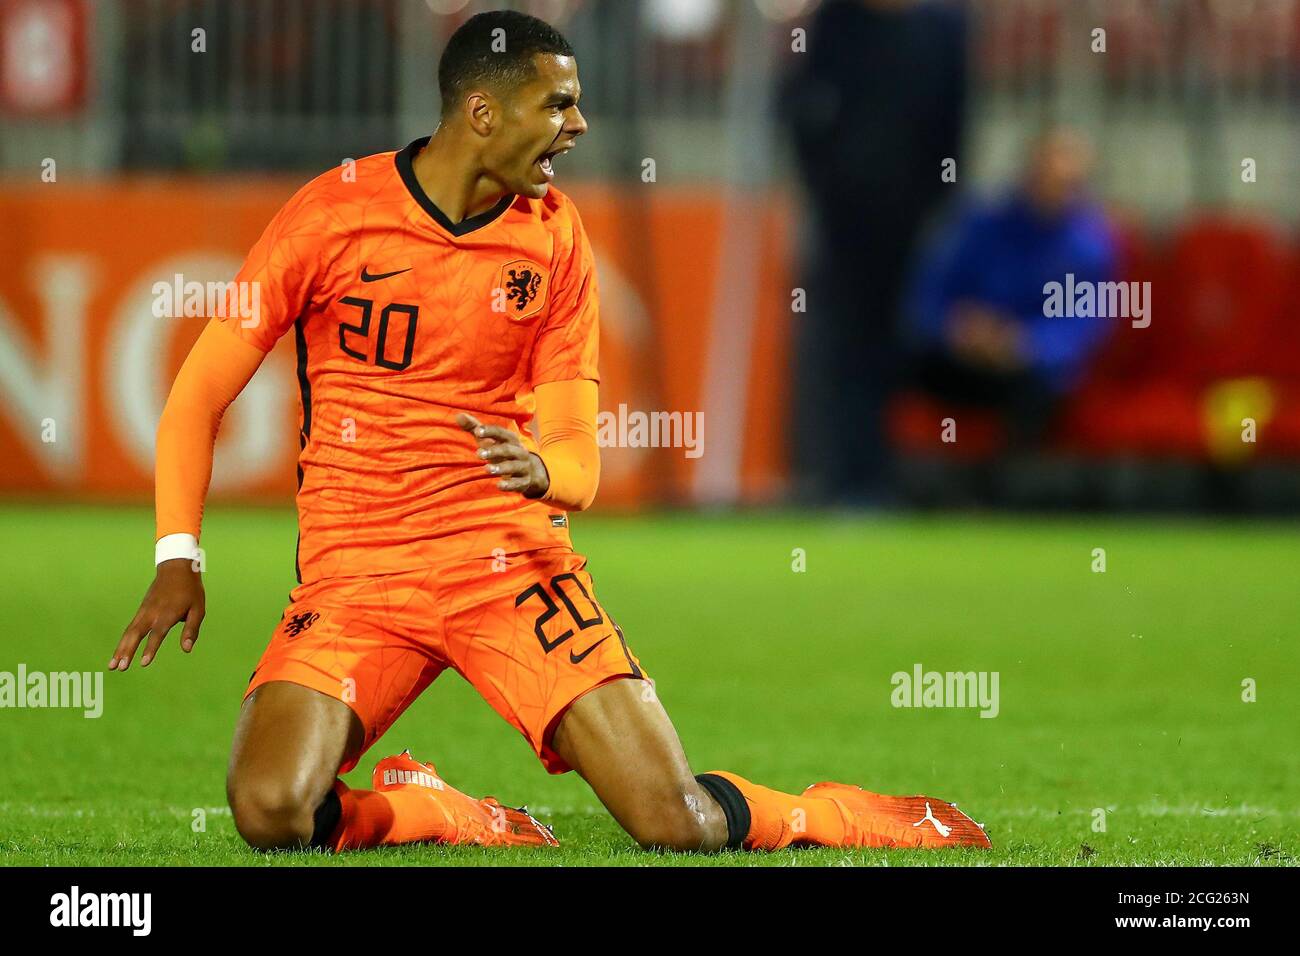 ALMERE, NETHERLANDS -  SEPTEMBER 8: Cody Gakpo of the Netherlands during the UEFA Euro Under 21 Qualifing match between The Netherlands and Norway on September 8, 2020 in Almere, The Netherlands.  *** Local Caption *** Cody Gakpo Stock Photo